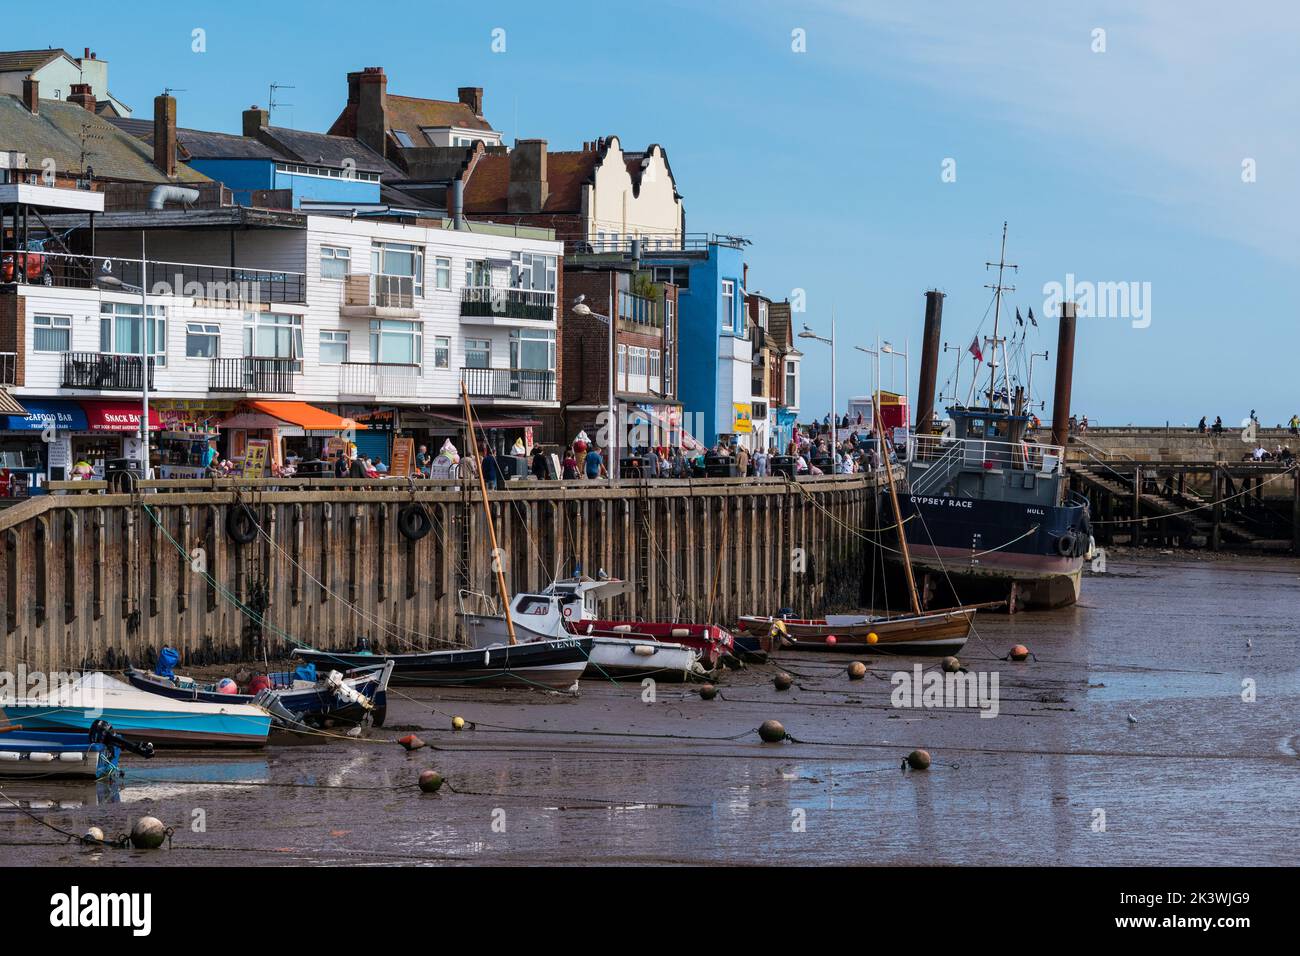 The commercial fishing harbour in Bridlington East Yorkshire, with small and larger fishing boats alongside the harbour wall and quayside shops. Stock Photo